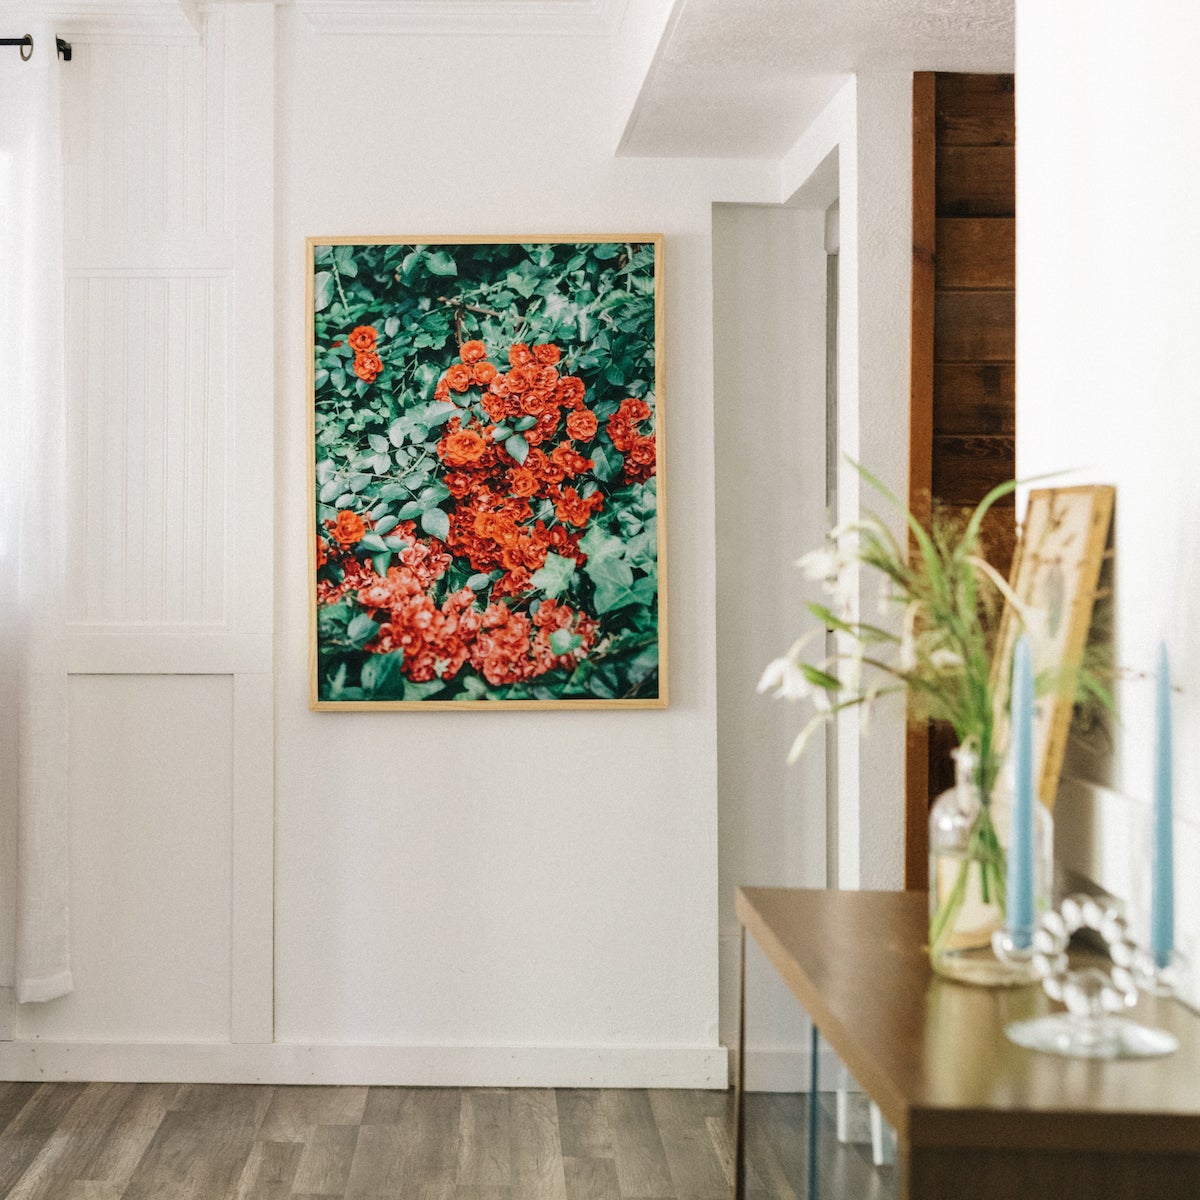 A living room scene where one wall has an oversized frame with a photo of bright red flowers.